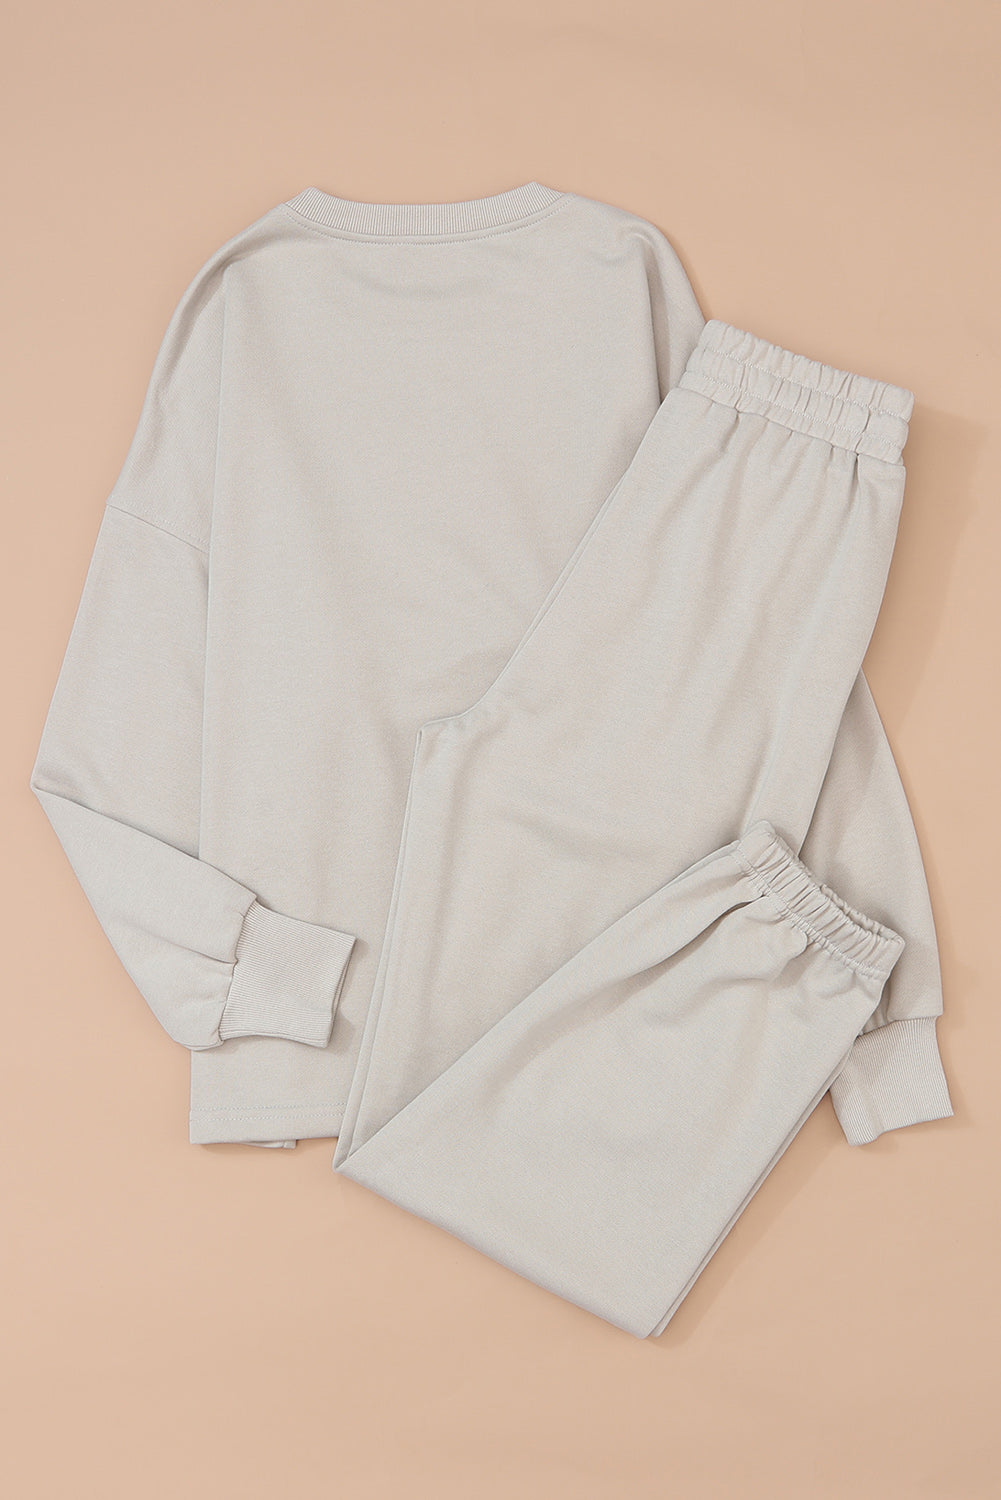 Gray Long Sleeve Top and Drawstring Pants Lounge Outfit